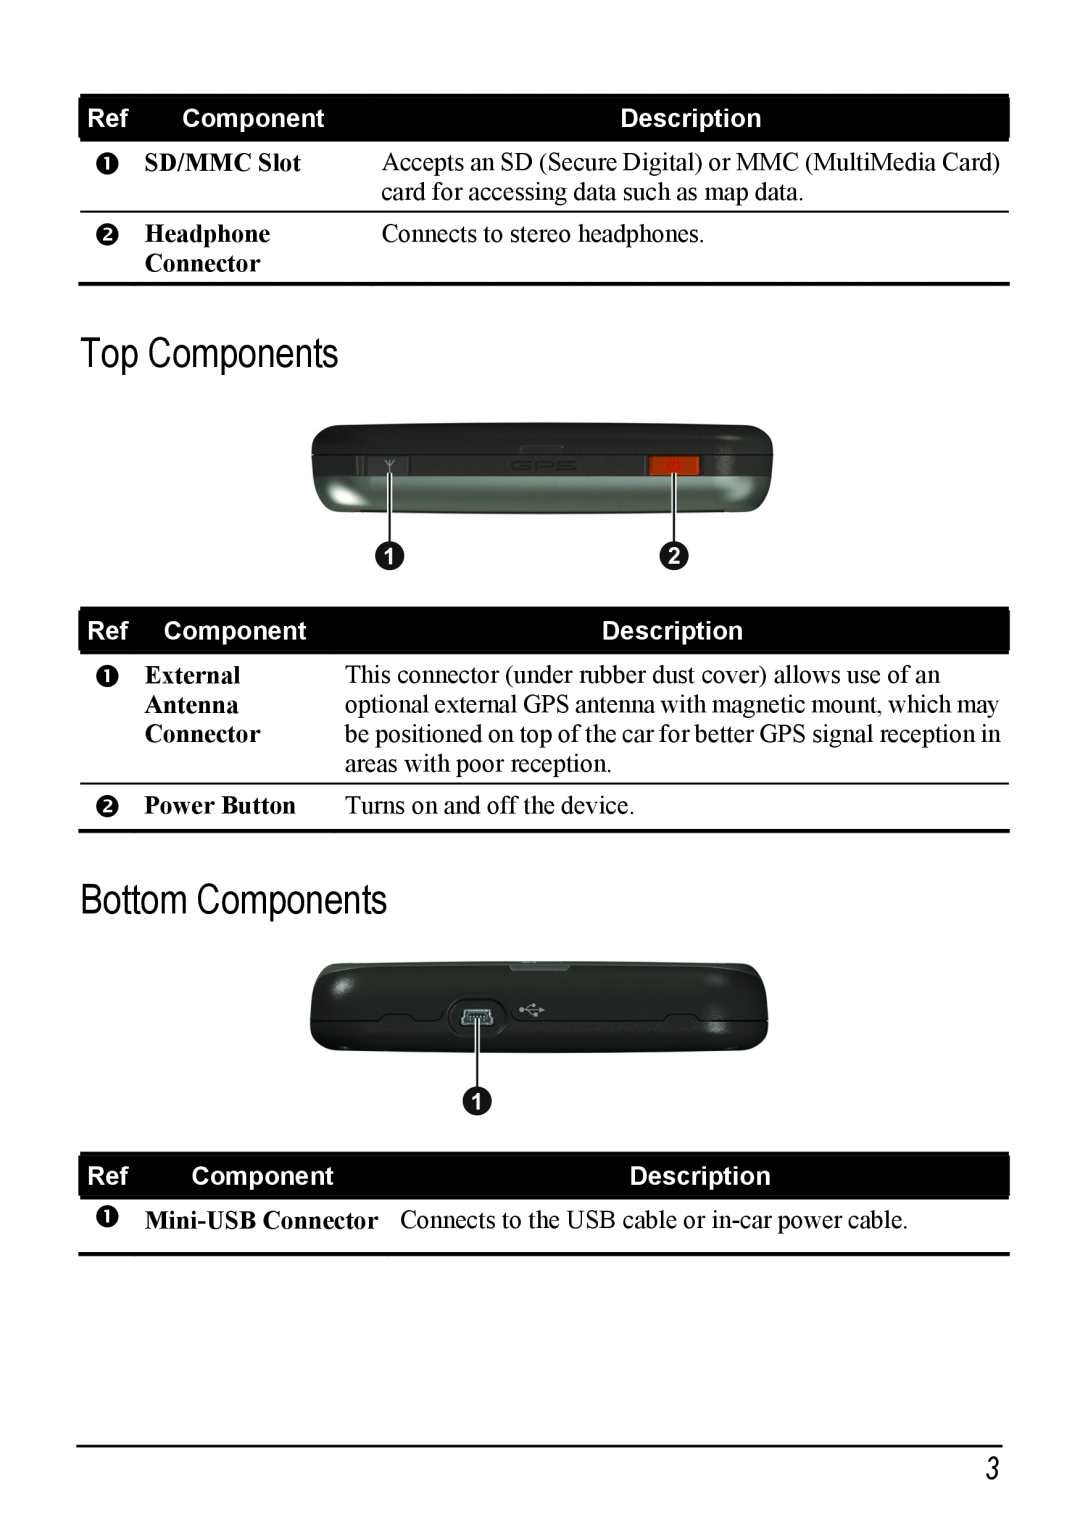 Jabra C220 Top Components, Bottom Components, Description, o Headphone, Connects to stereo headphones, Connector, Antenna 